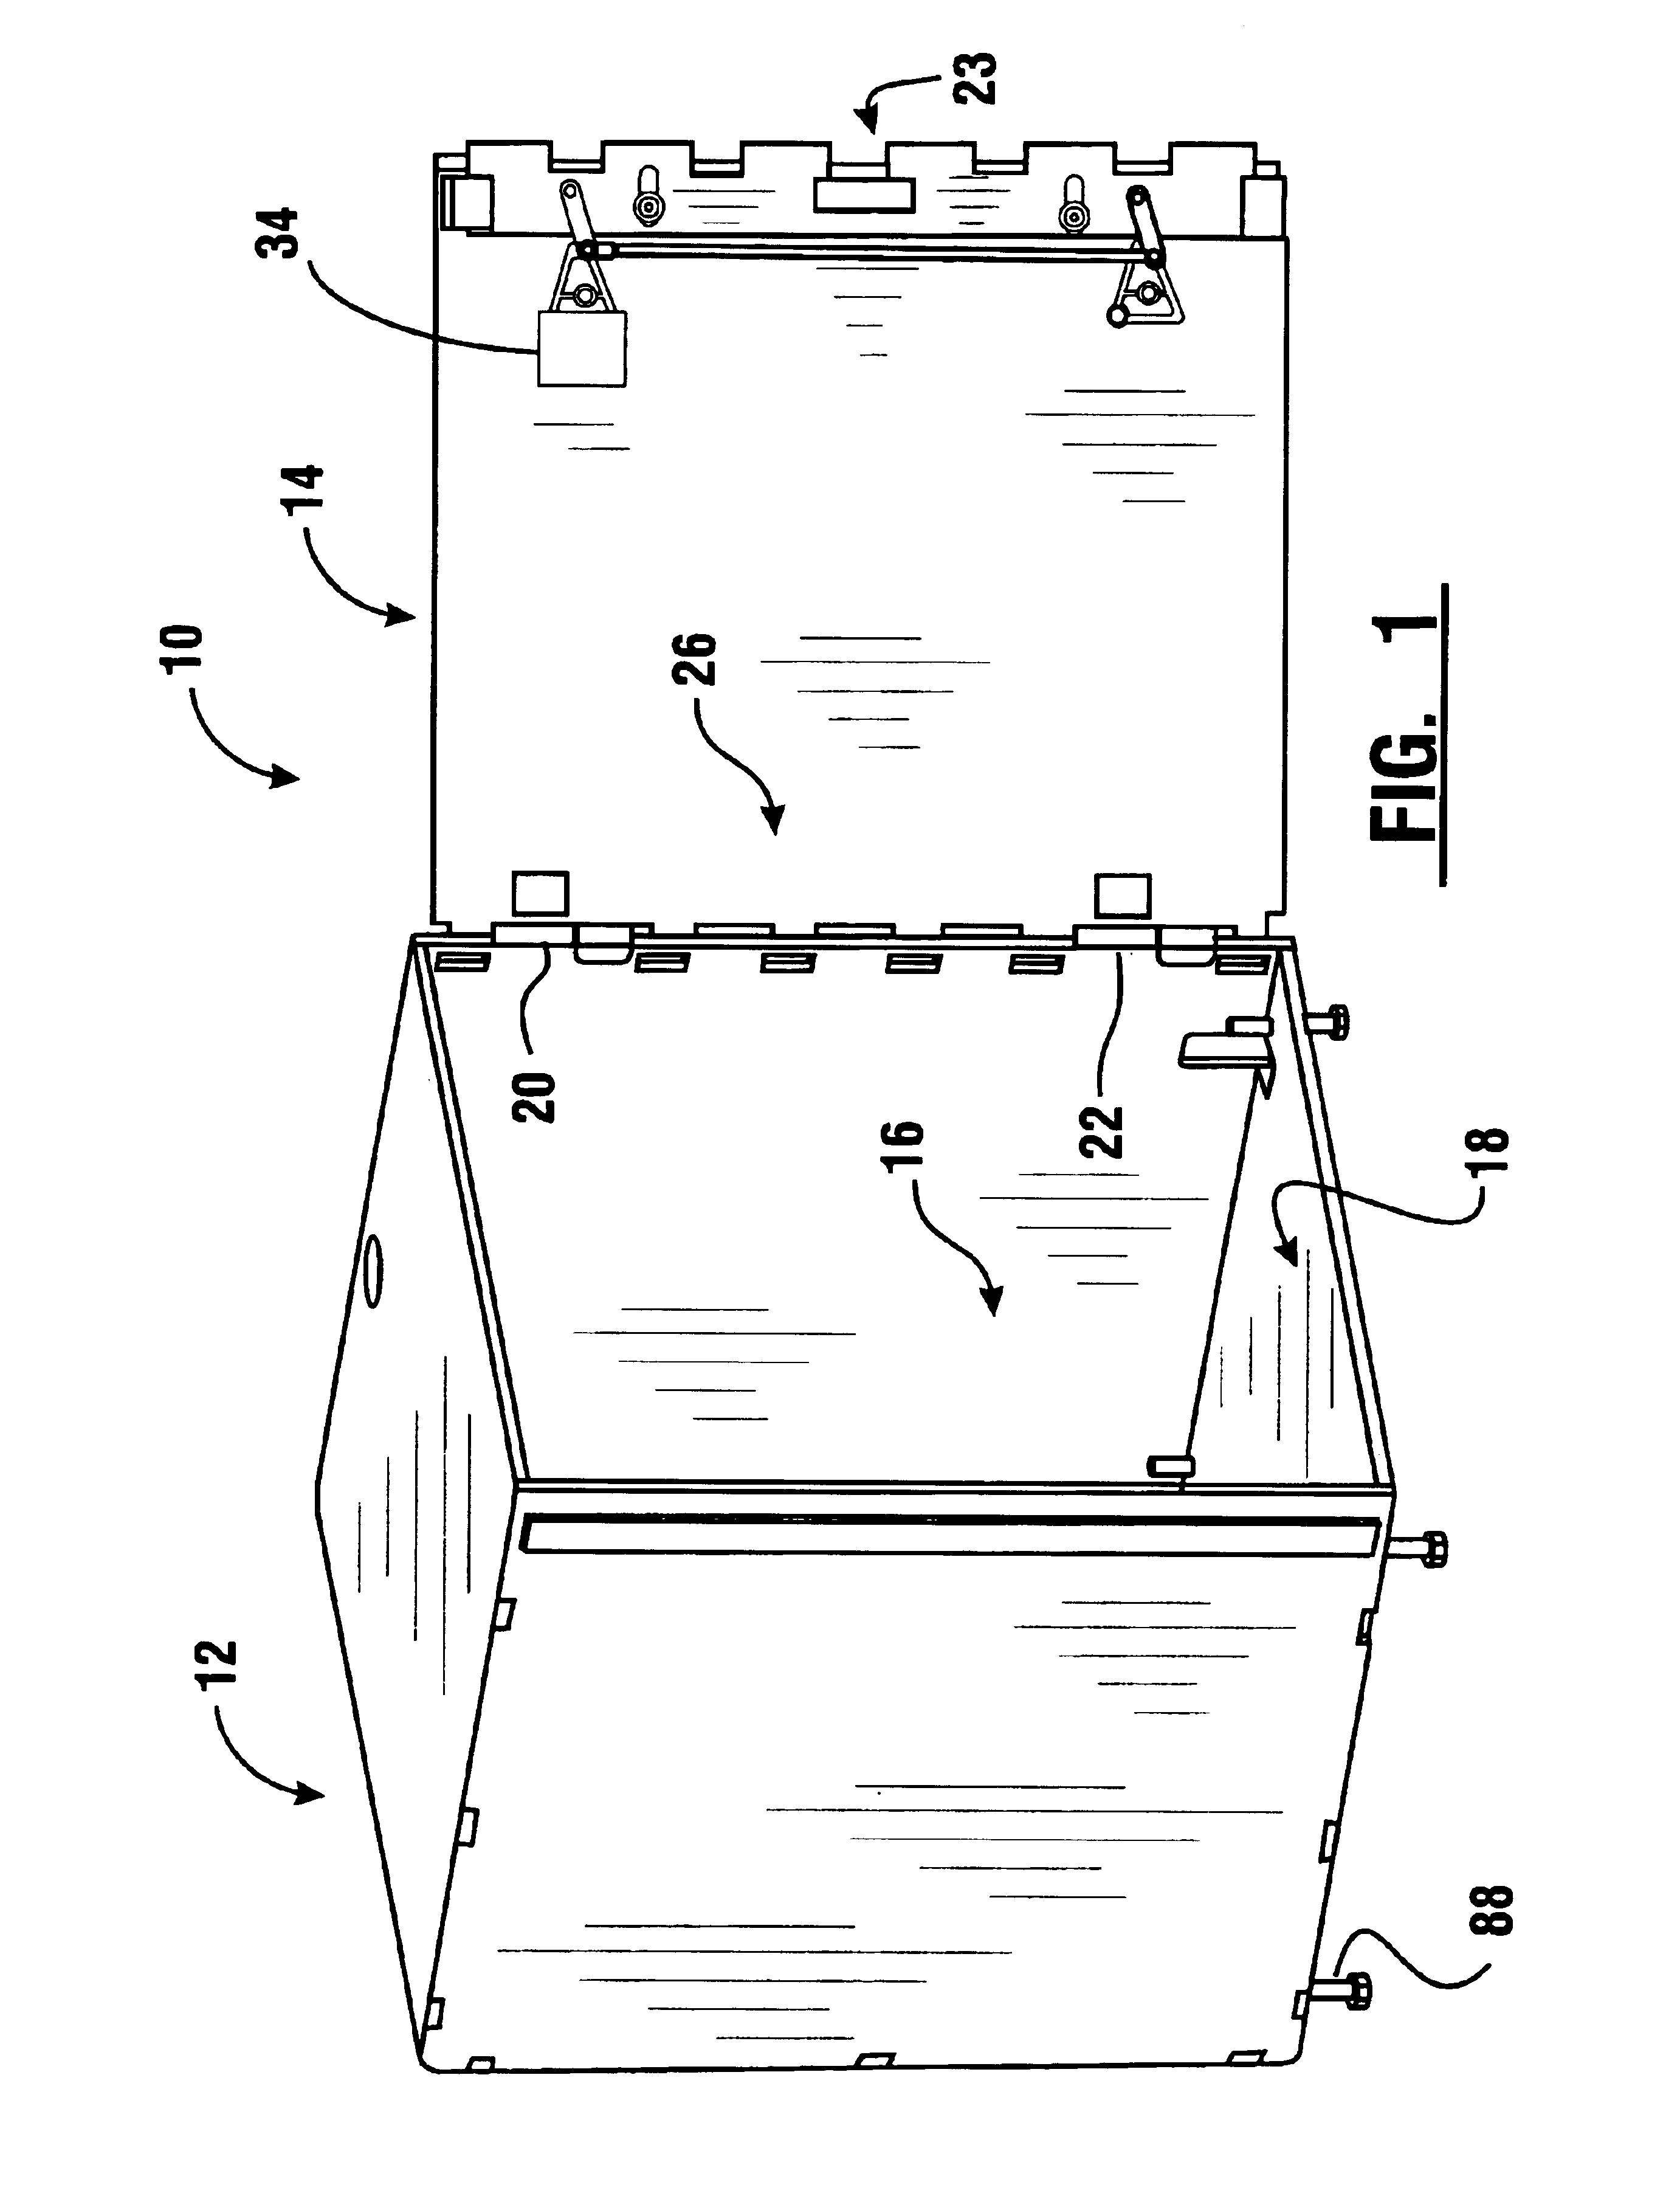 Locking bolt work apparatus for automated banking machine